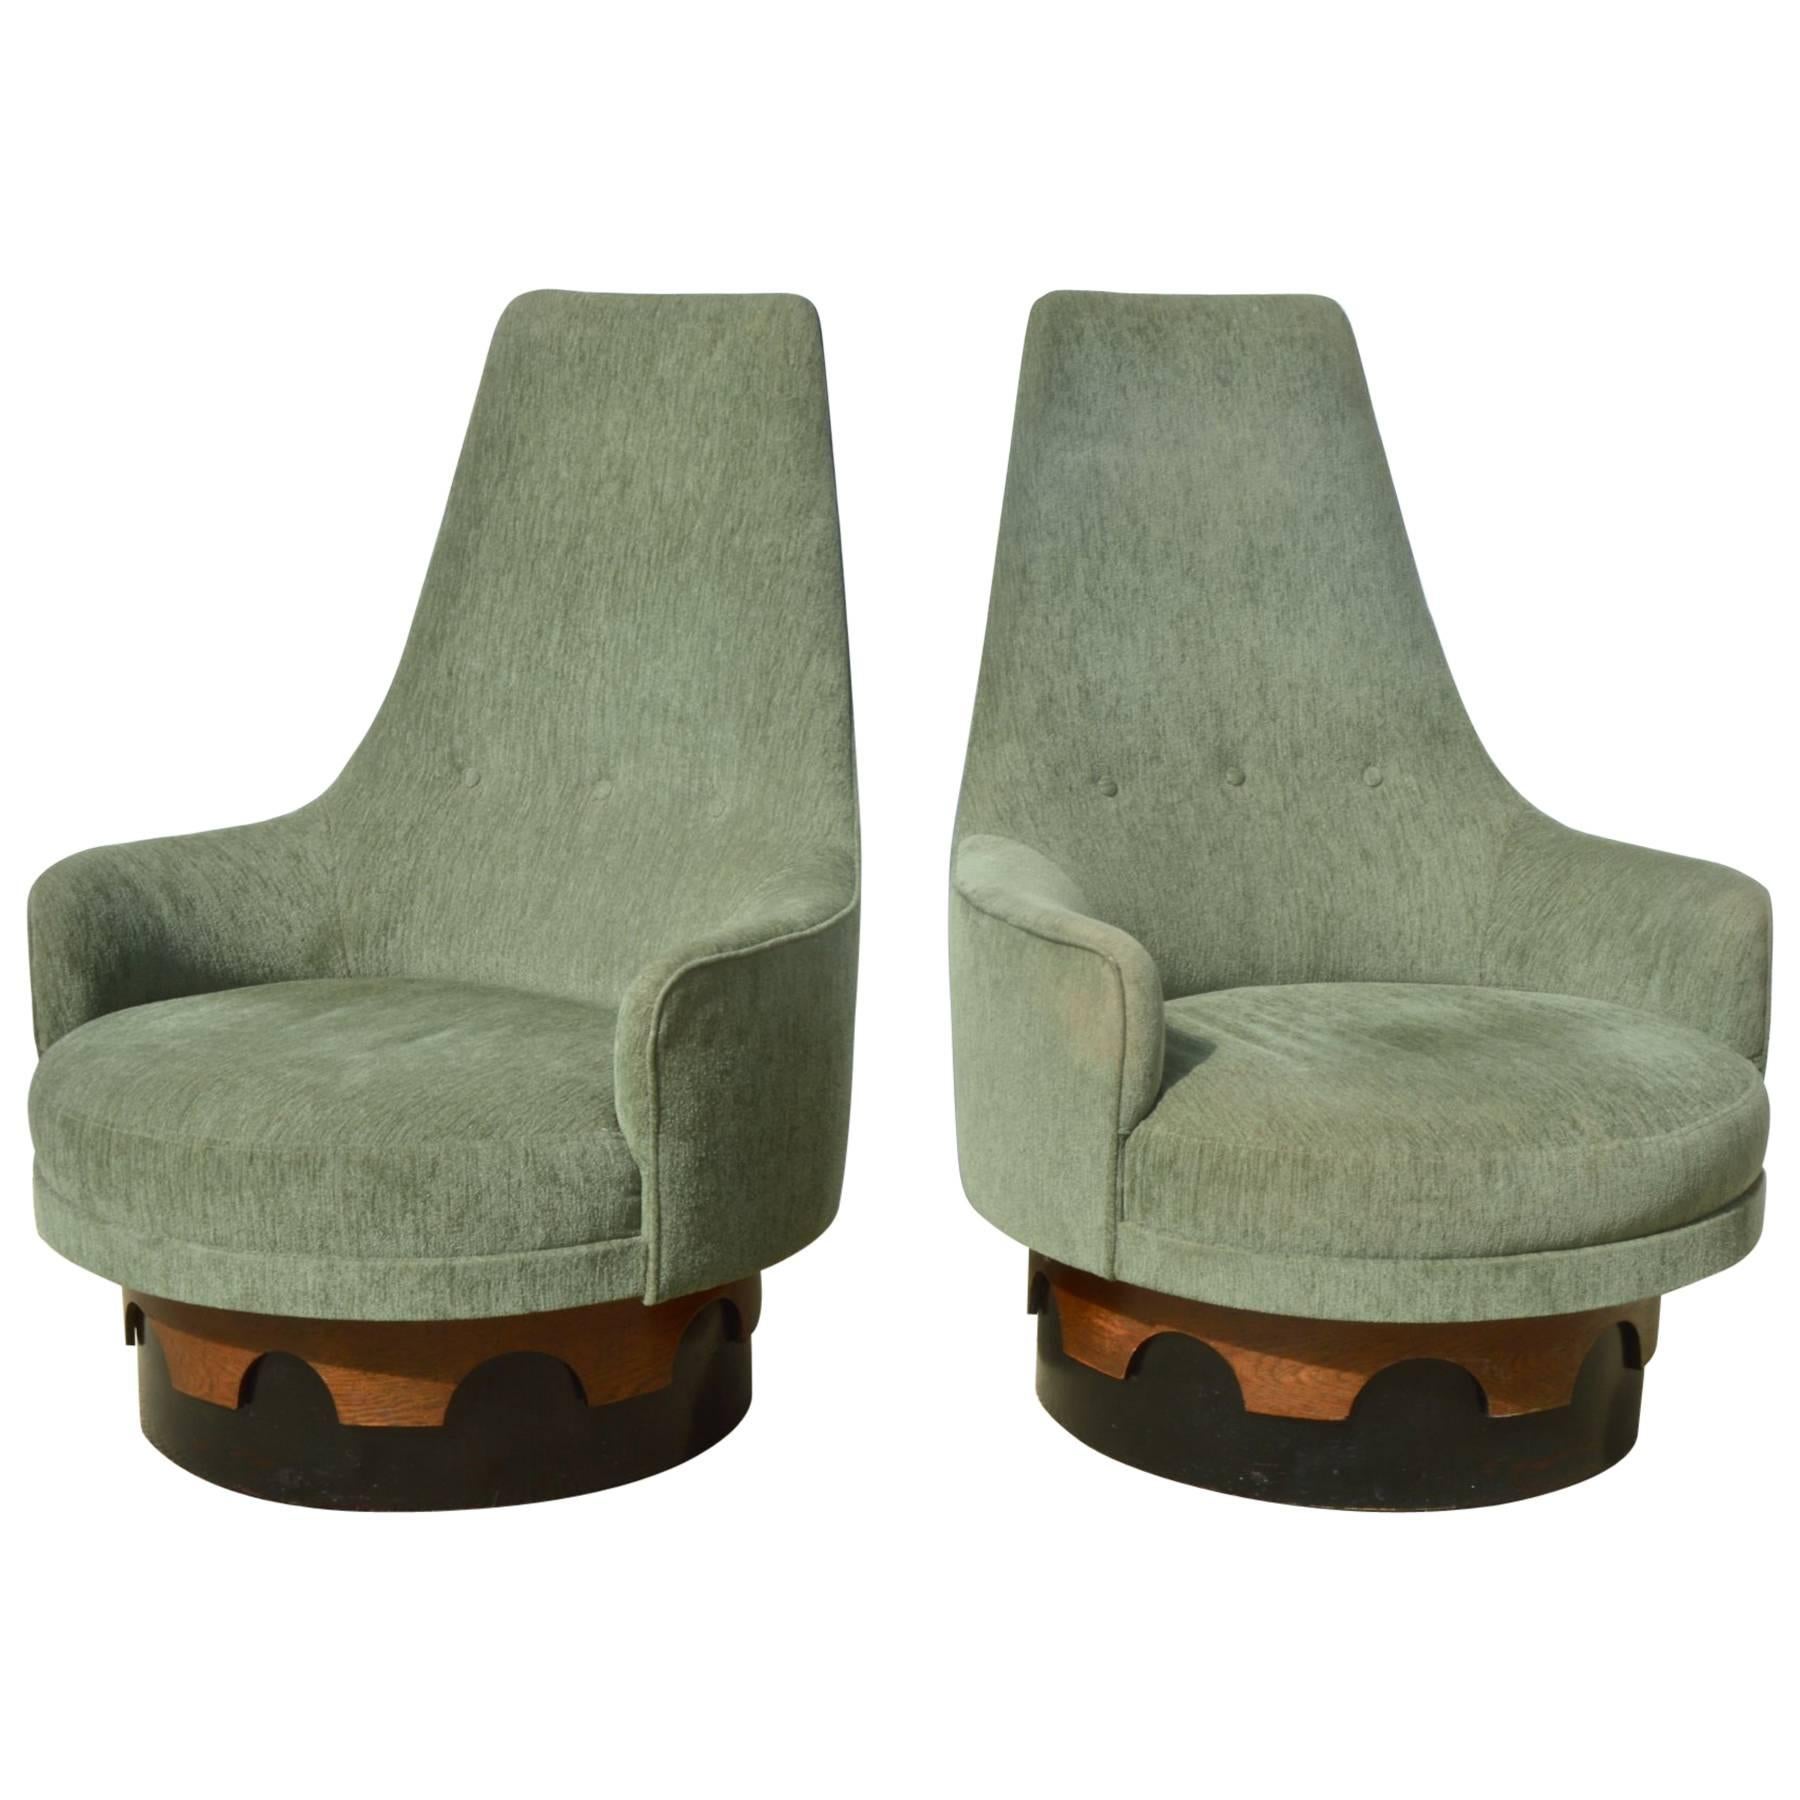 Adrian Pearsall High Back Swivel Chairs, a Pair For Sale